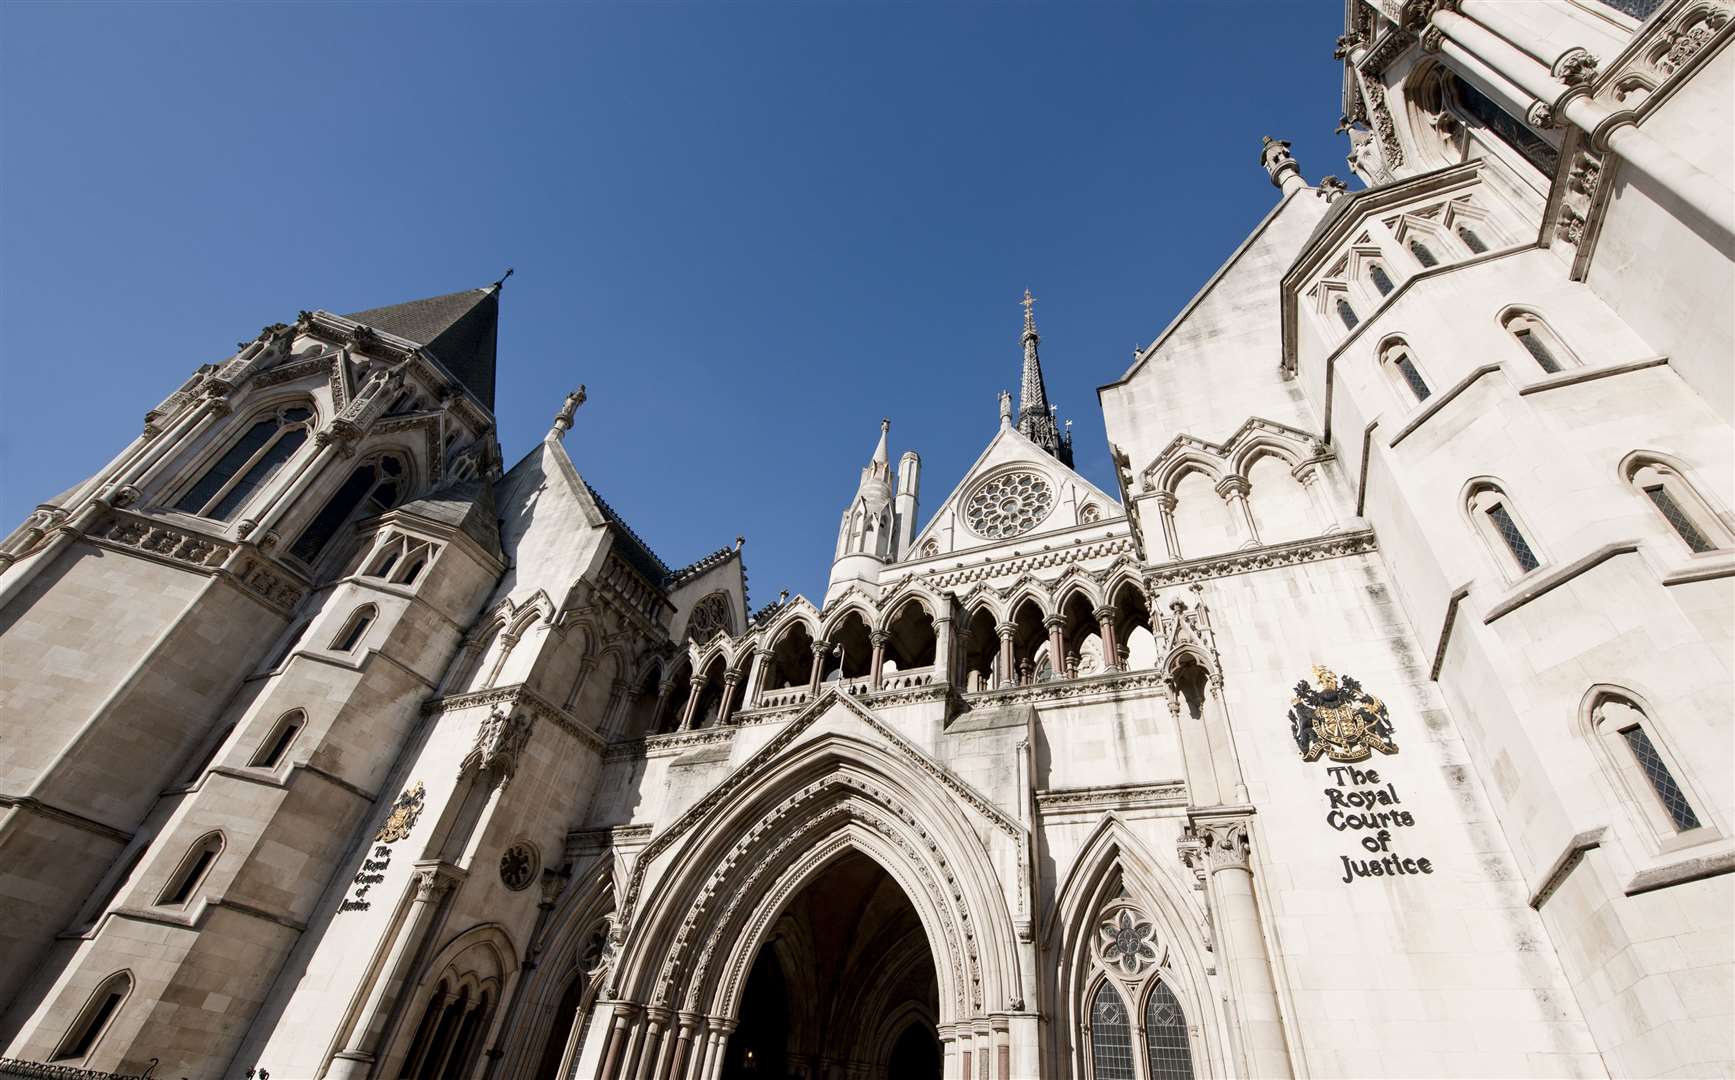 The High Court in London where the decision was made